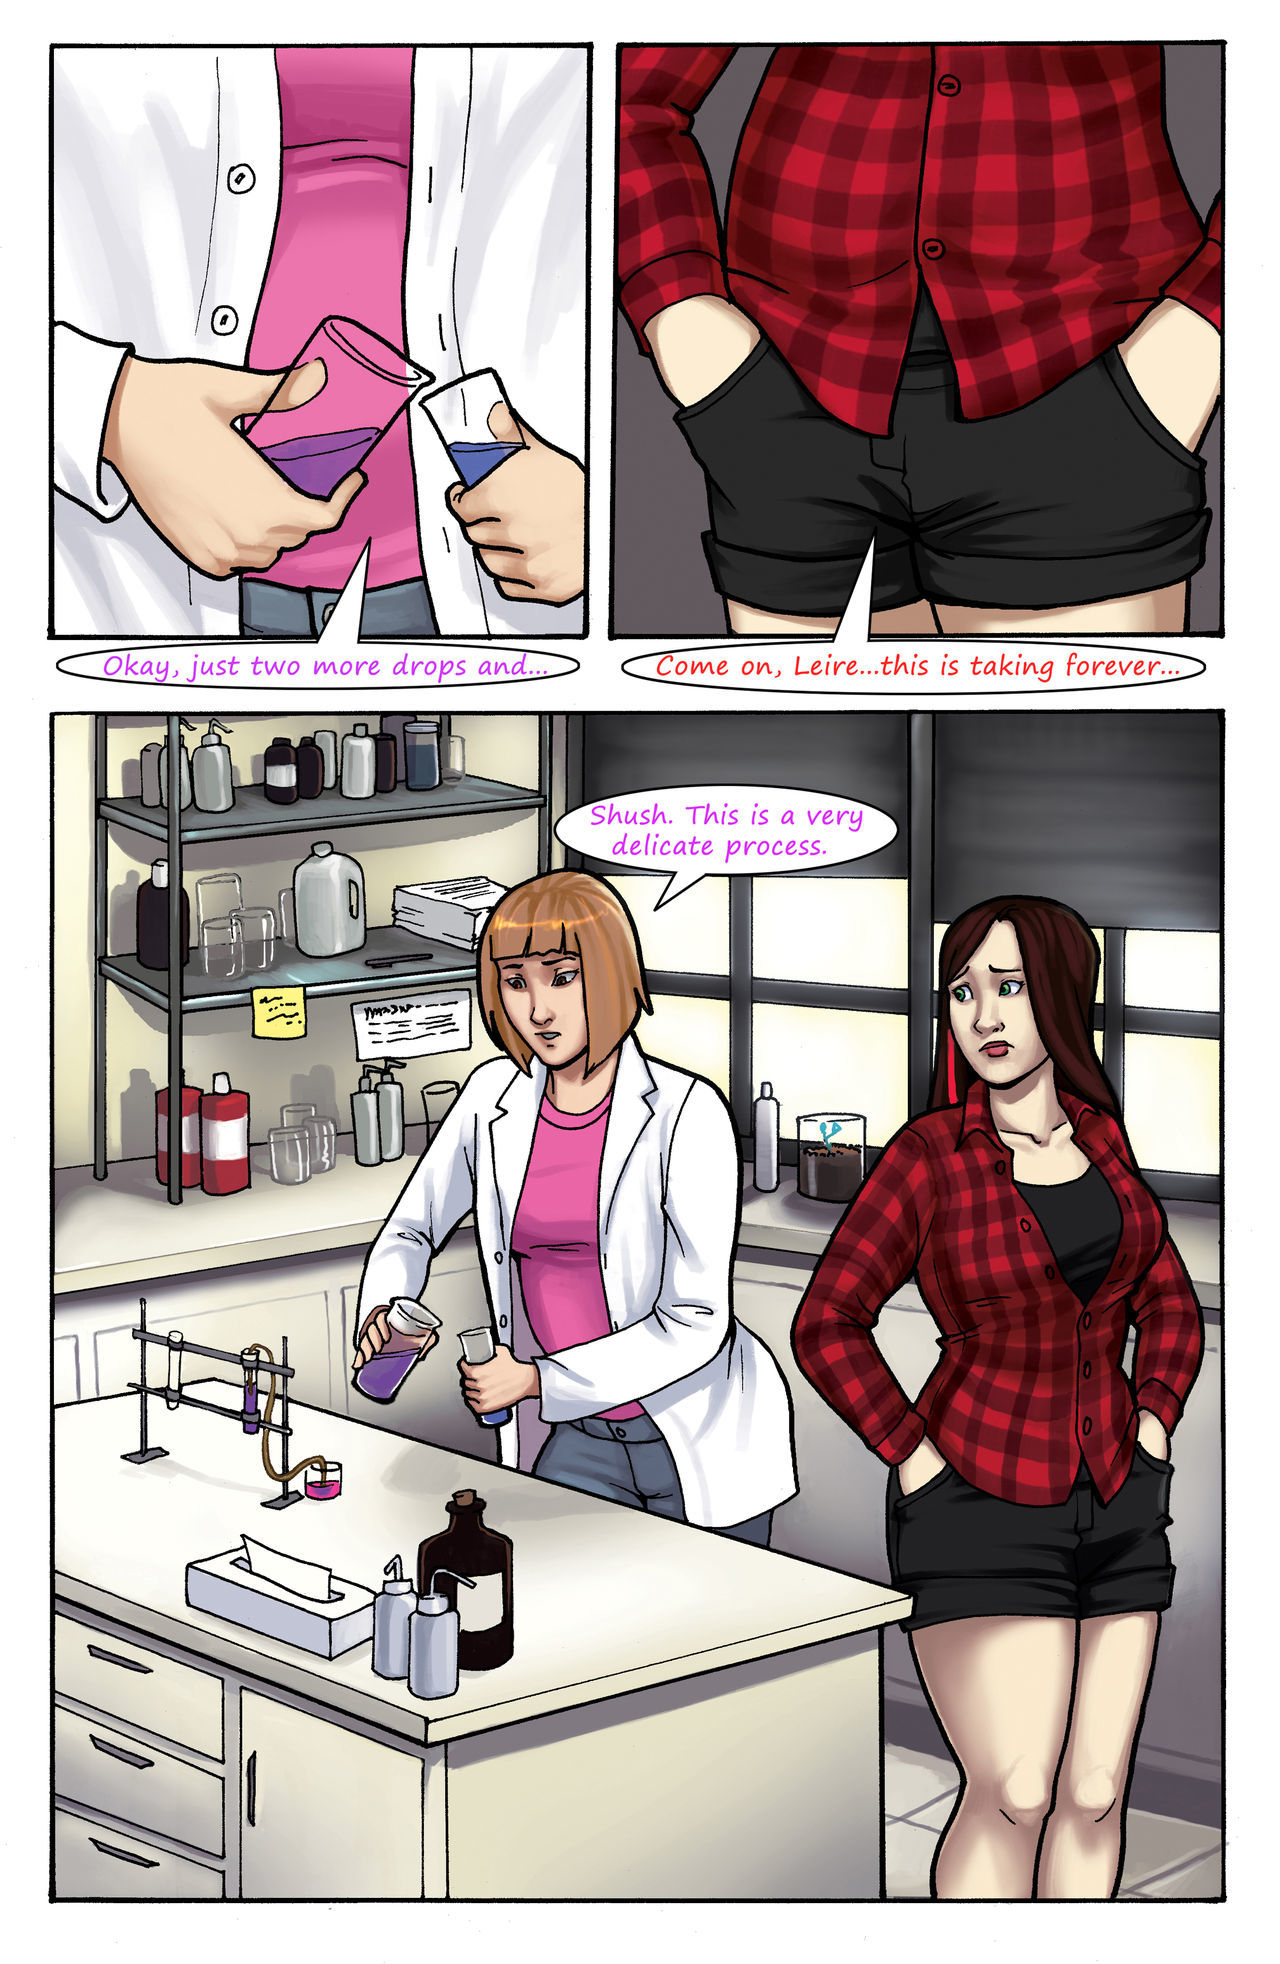 Science Gone Awry by Olympic-Dames page 1